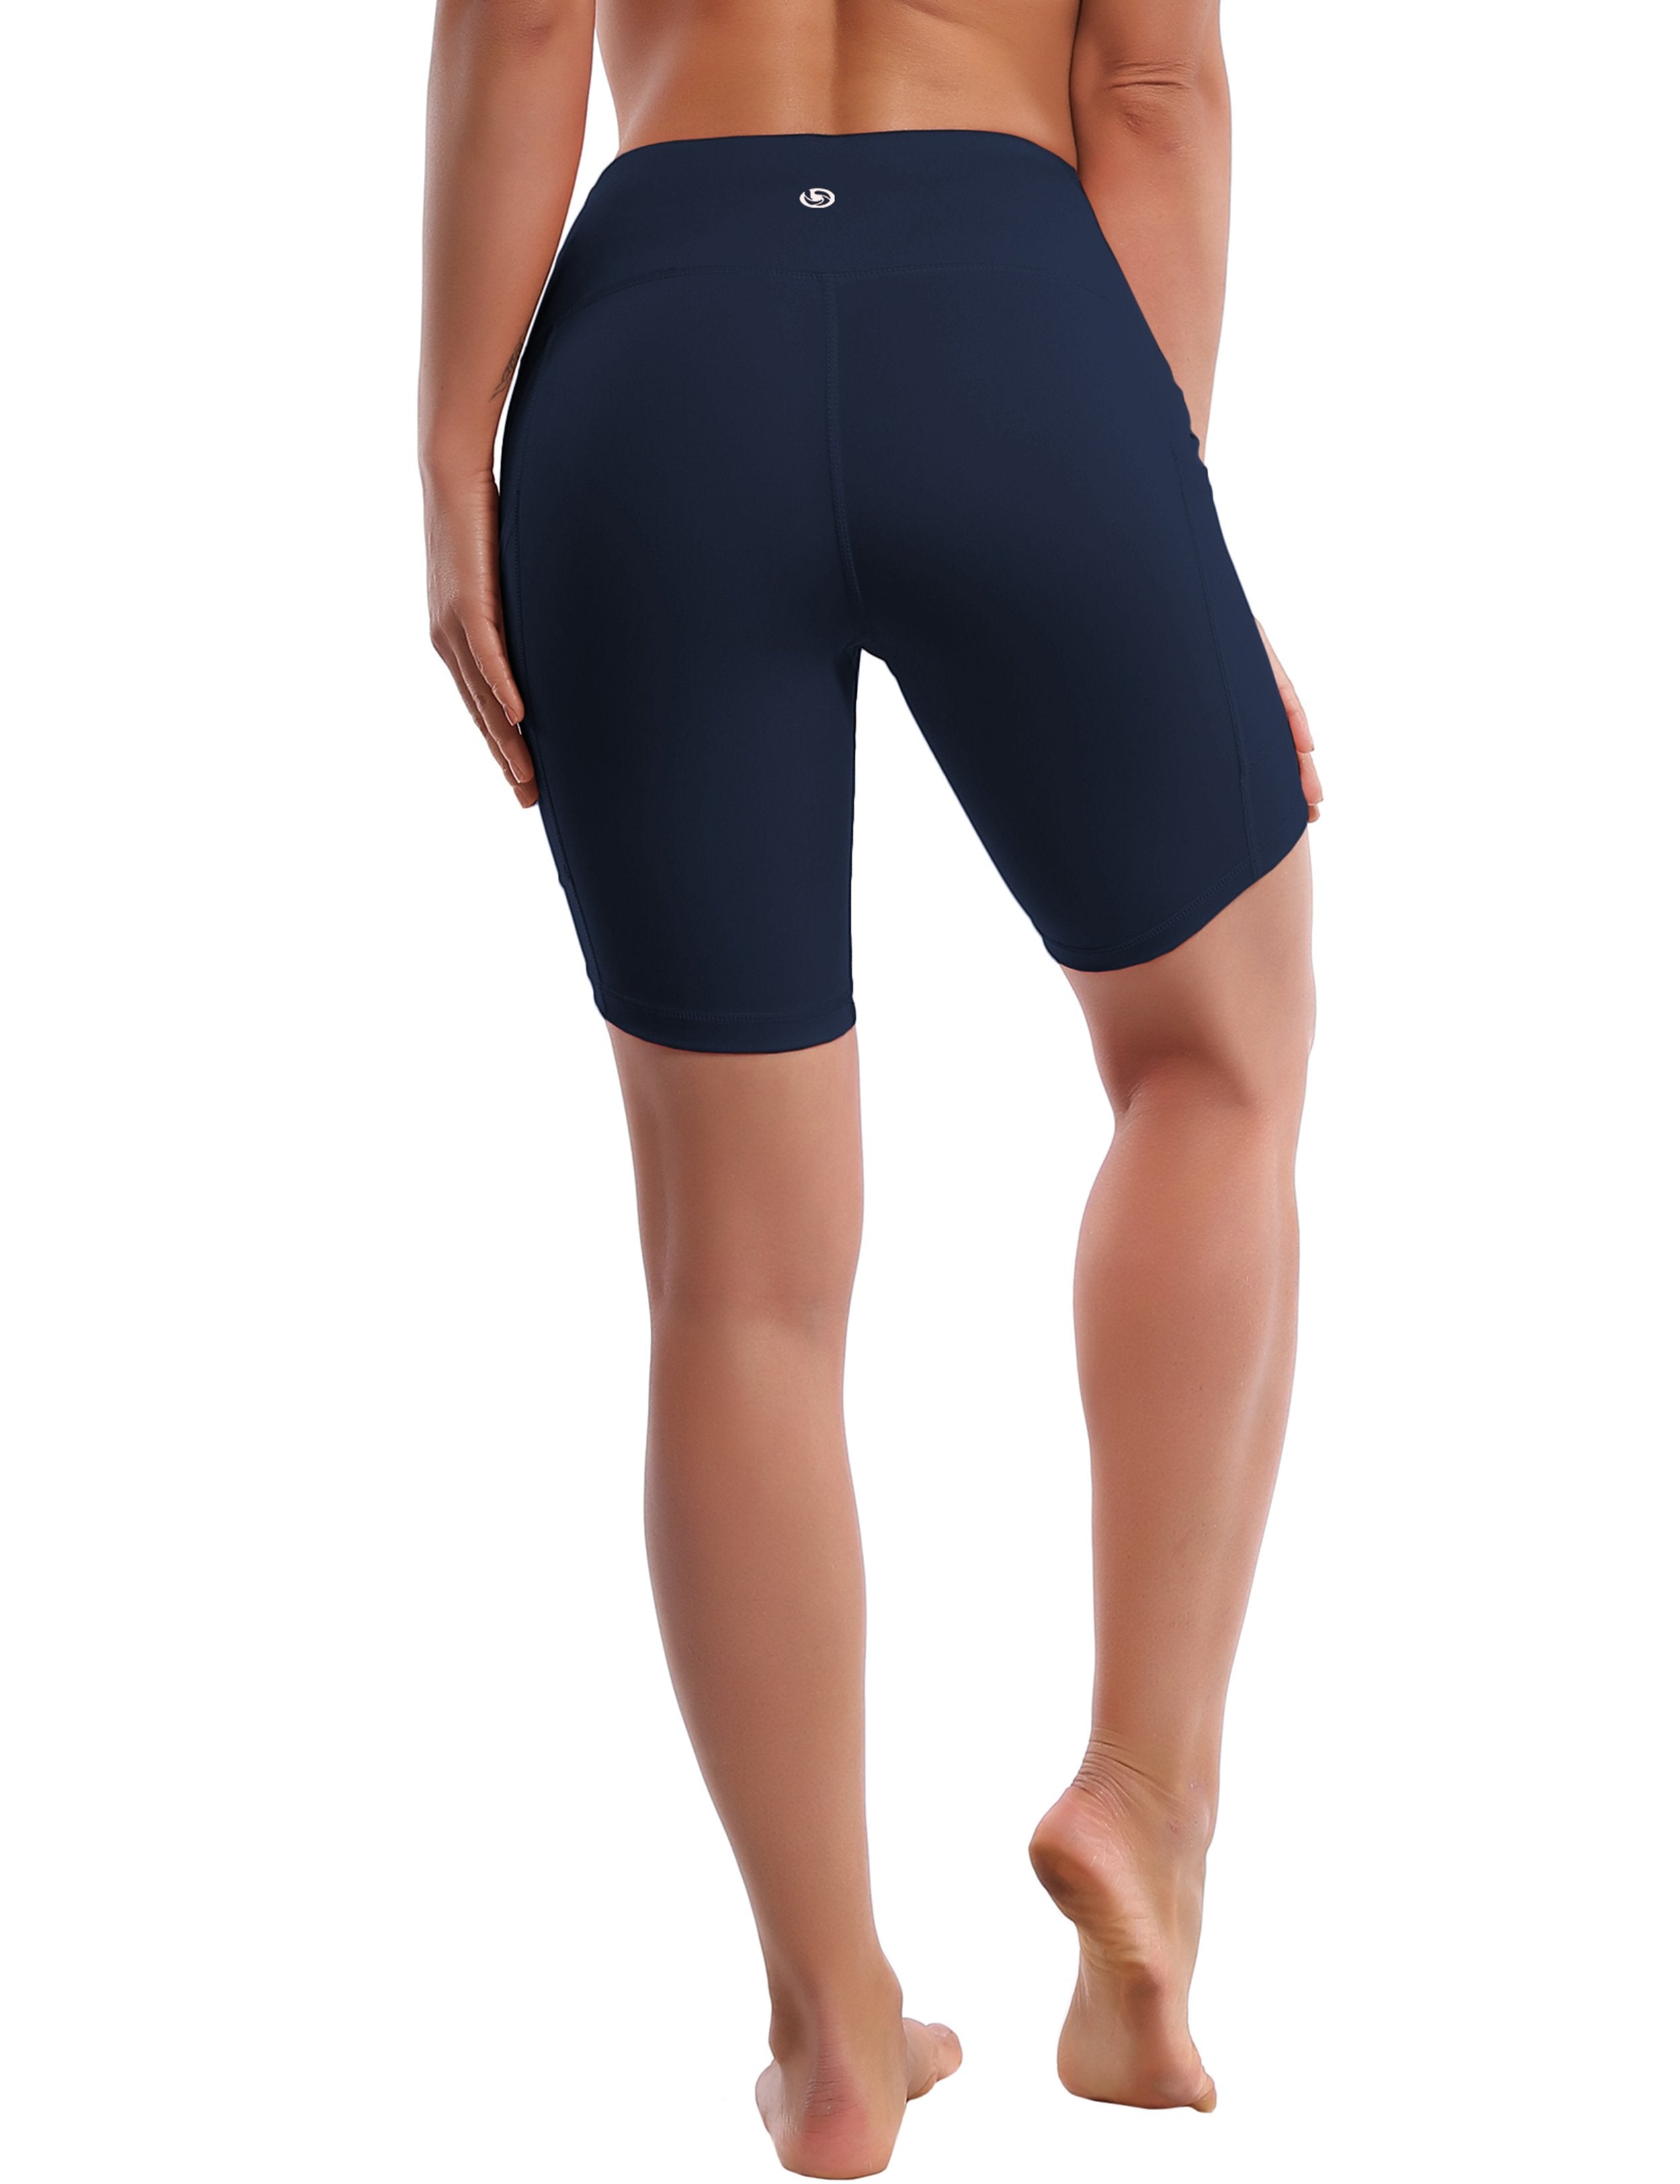 8" Side Pockets Yoga Shorts darknavy Sleek, soft, smooth and totally comfortable: our newest style is here. Softest-ever fabric High elasticity High density 4-way stretch Fabric doesn't attract lint easily No see-through Moisture-wicking Machine wash 75% Nylon, 25% Spandex